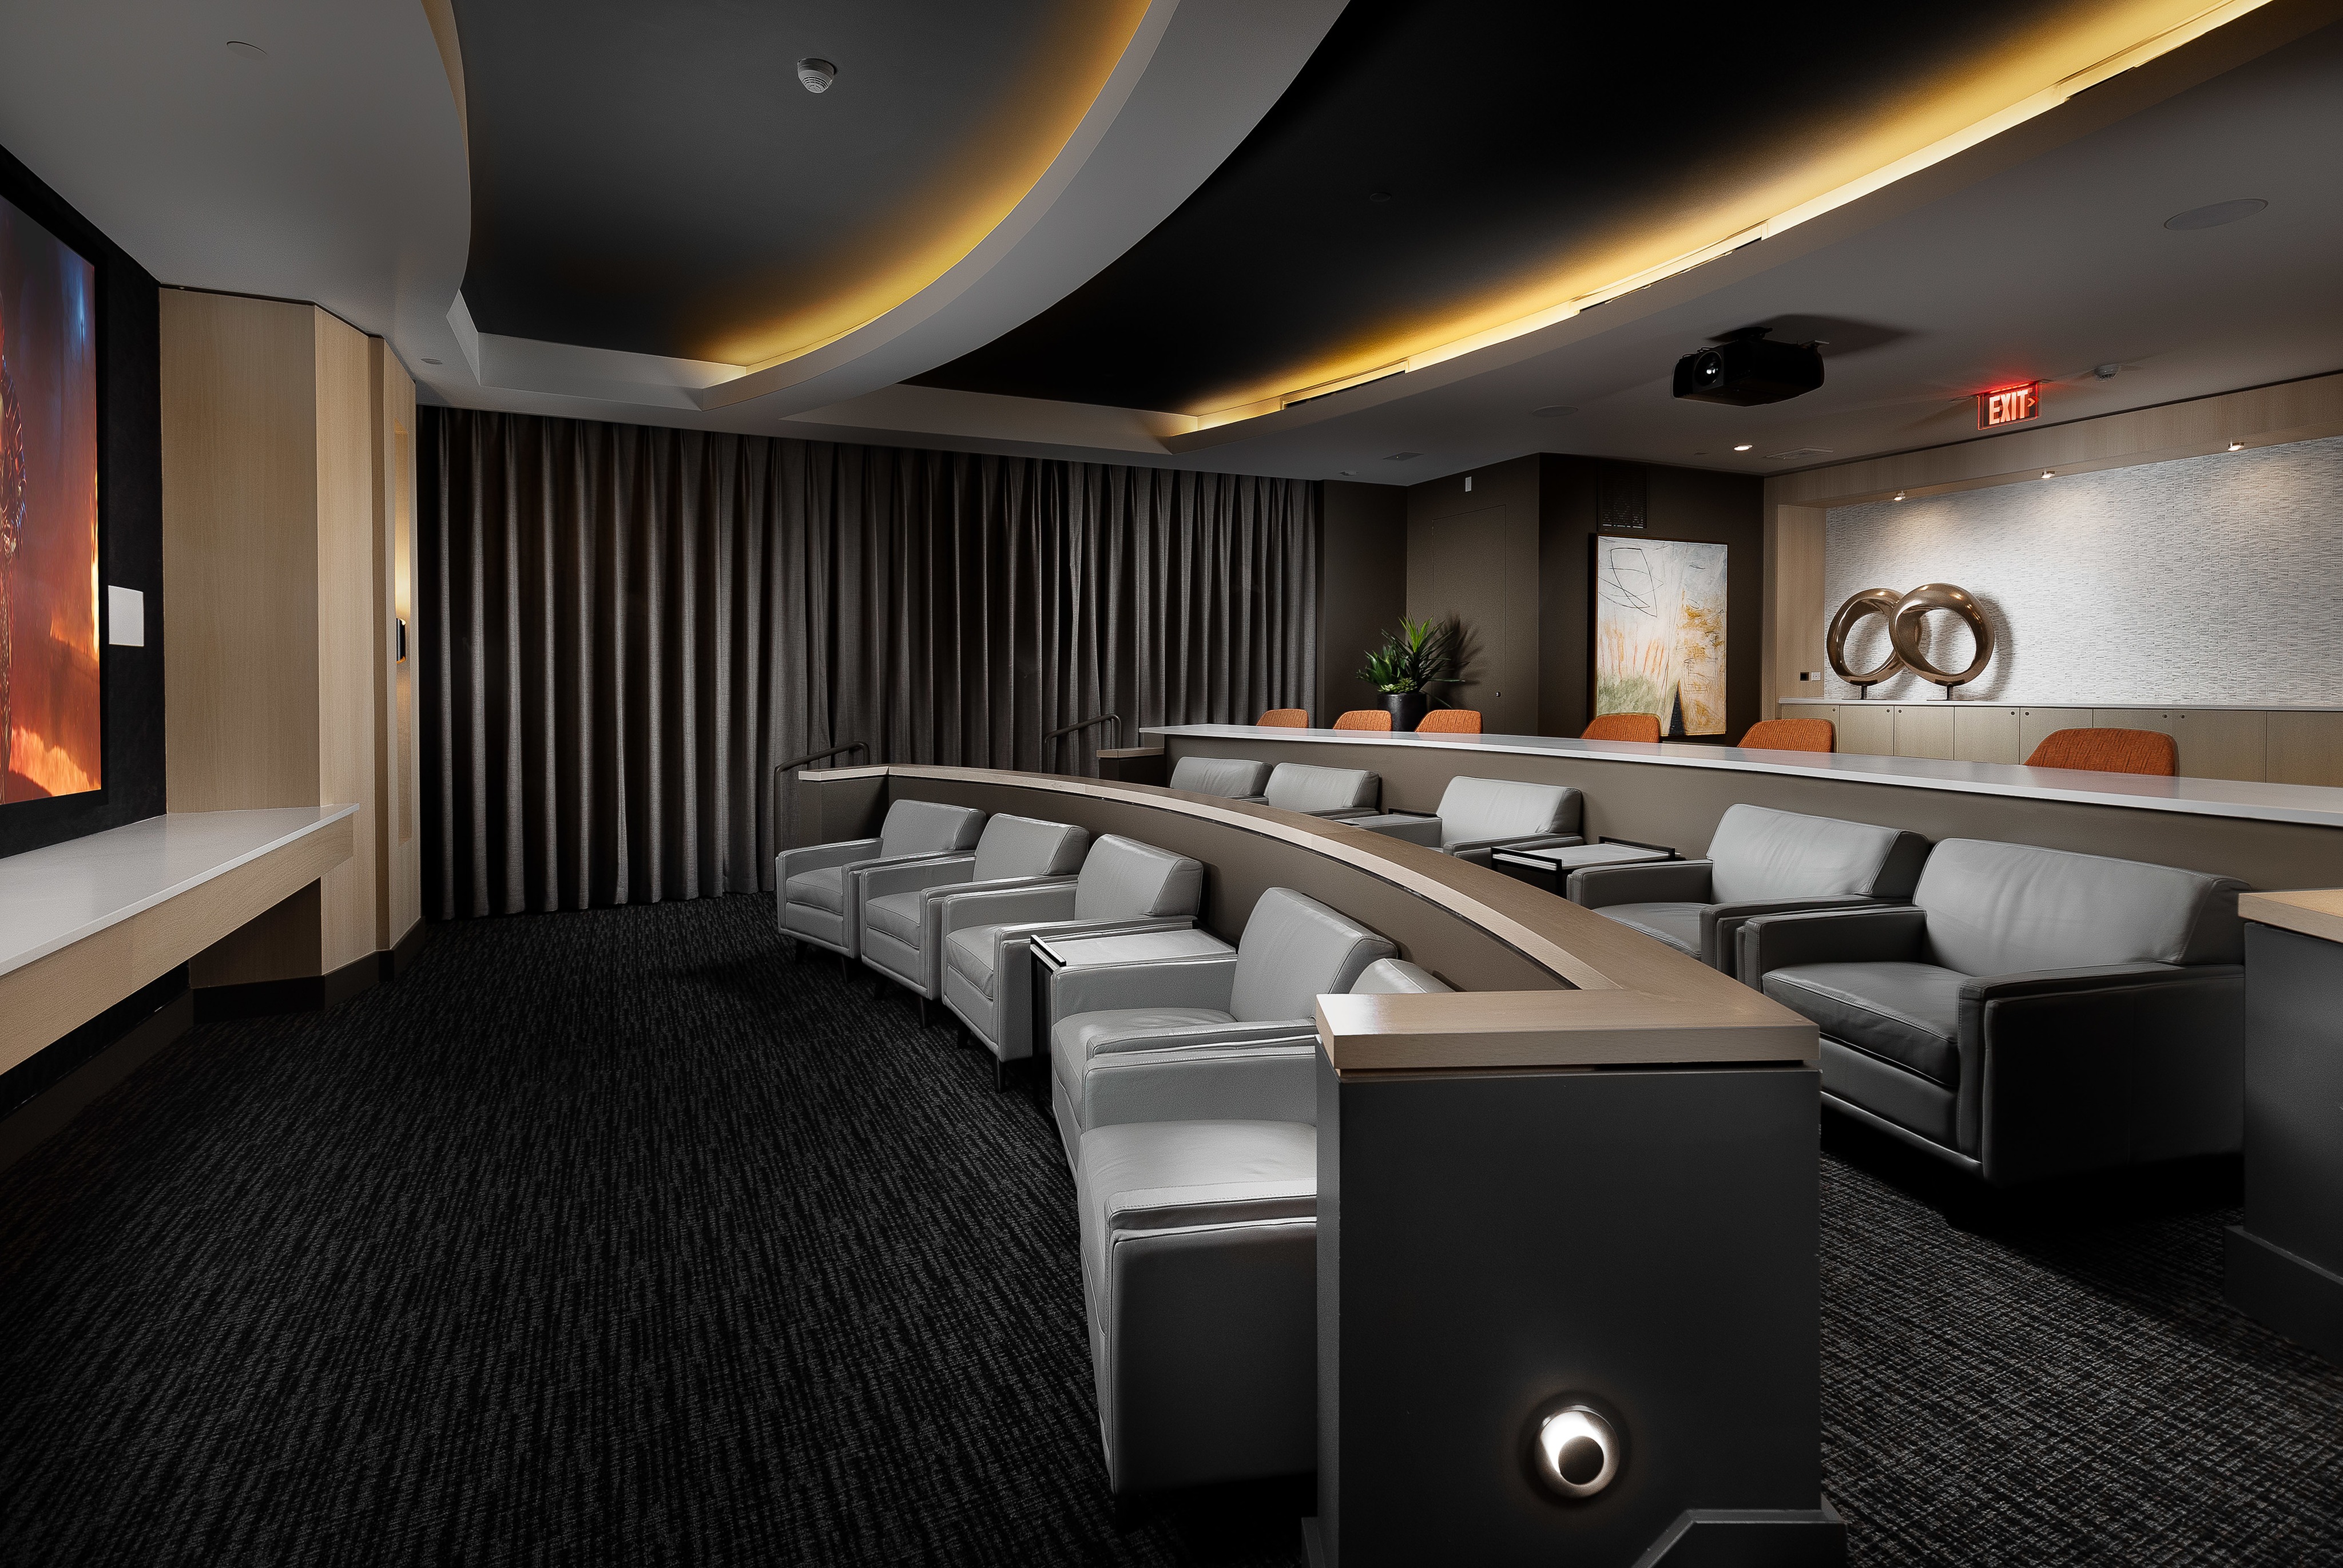 Private Media Room Featuring an Impressive HD Projector and Theater-Style Seating